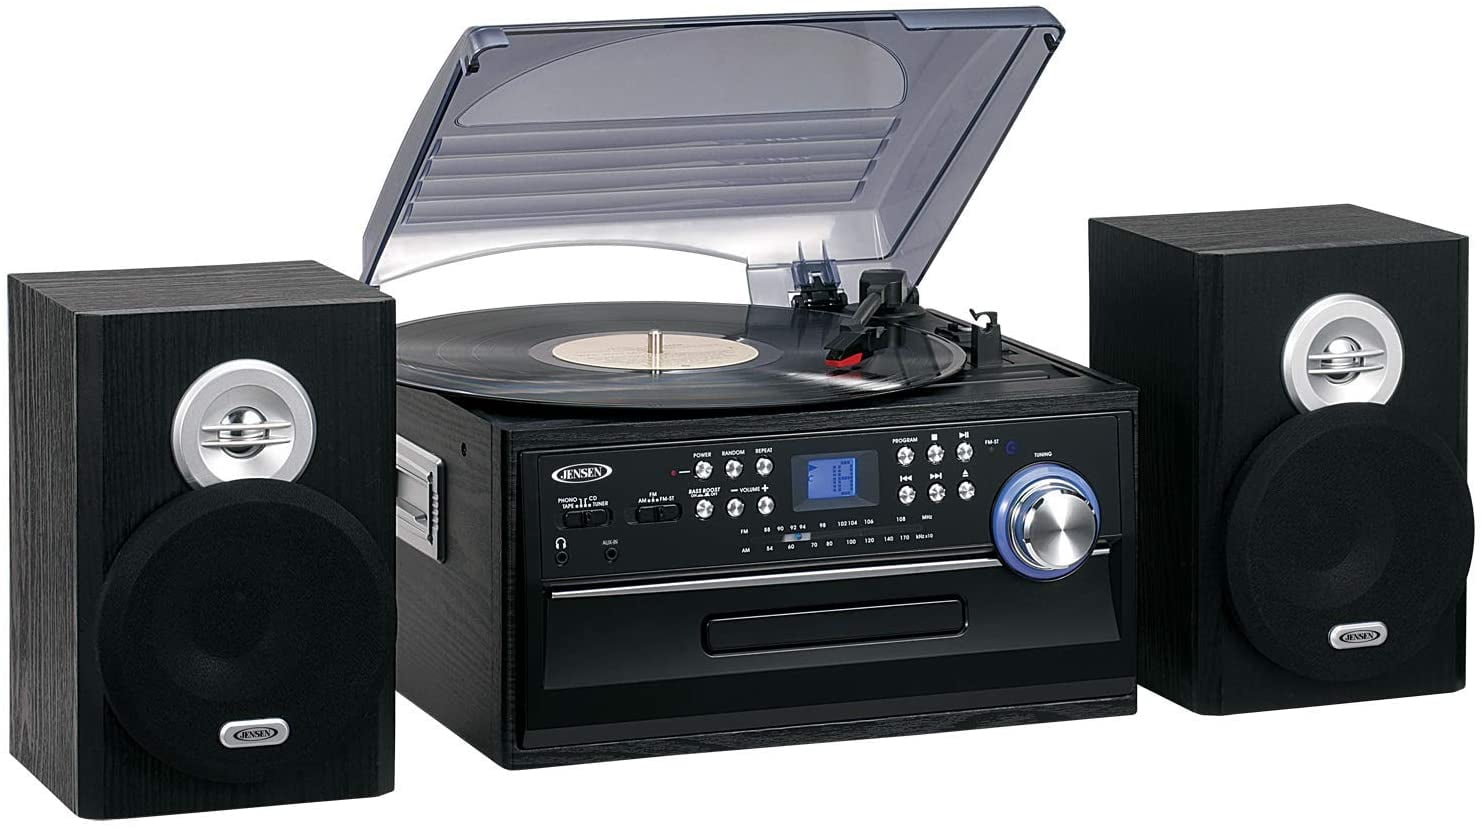 Consulate shorthand Thorny Jensen All-In-One Hi-Fi Stereo CD Player Turntable & Digital AM/FM Radio  Tuner Tape Cassette Player Mega Bass Reflex Stereo Sound System -  Walmart.com